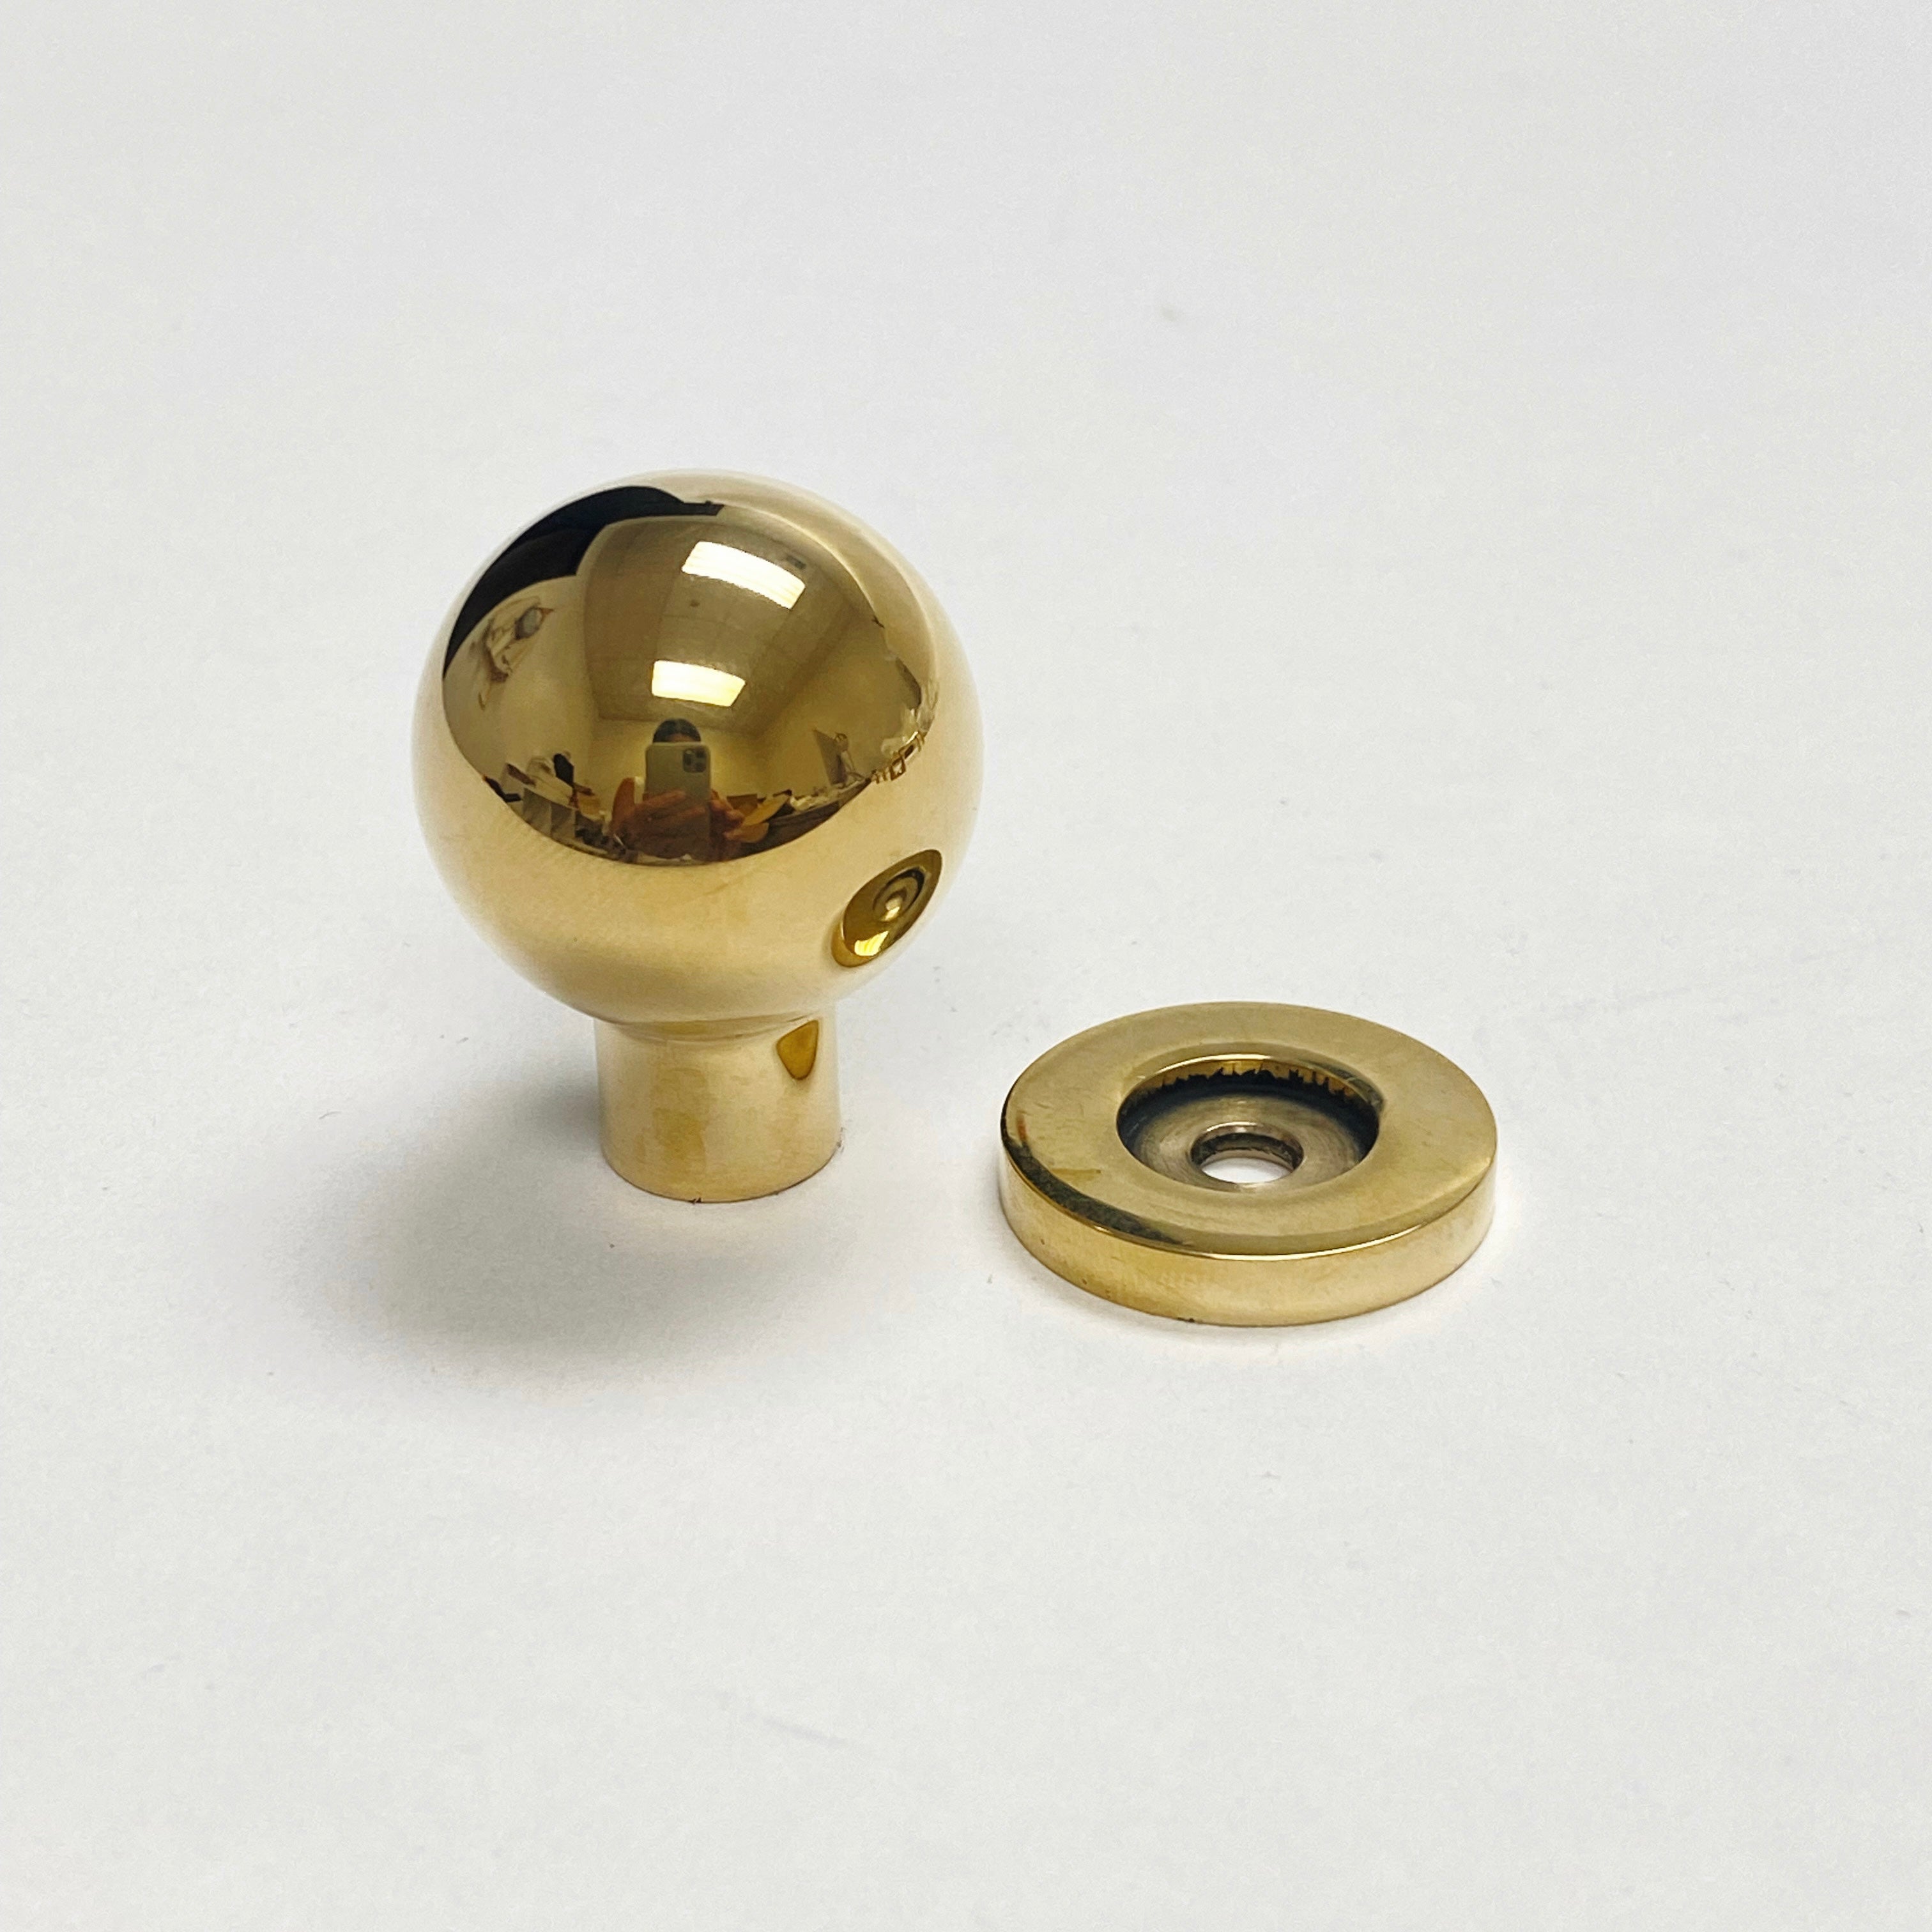 Omni Cabinet Knobs and Drawer Pulls in Unlacquered Brass